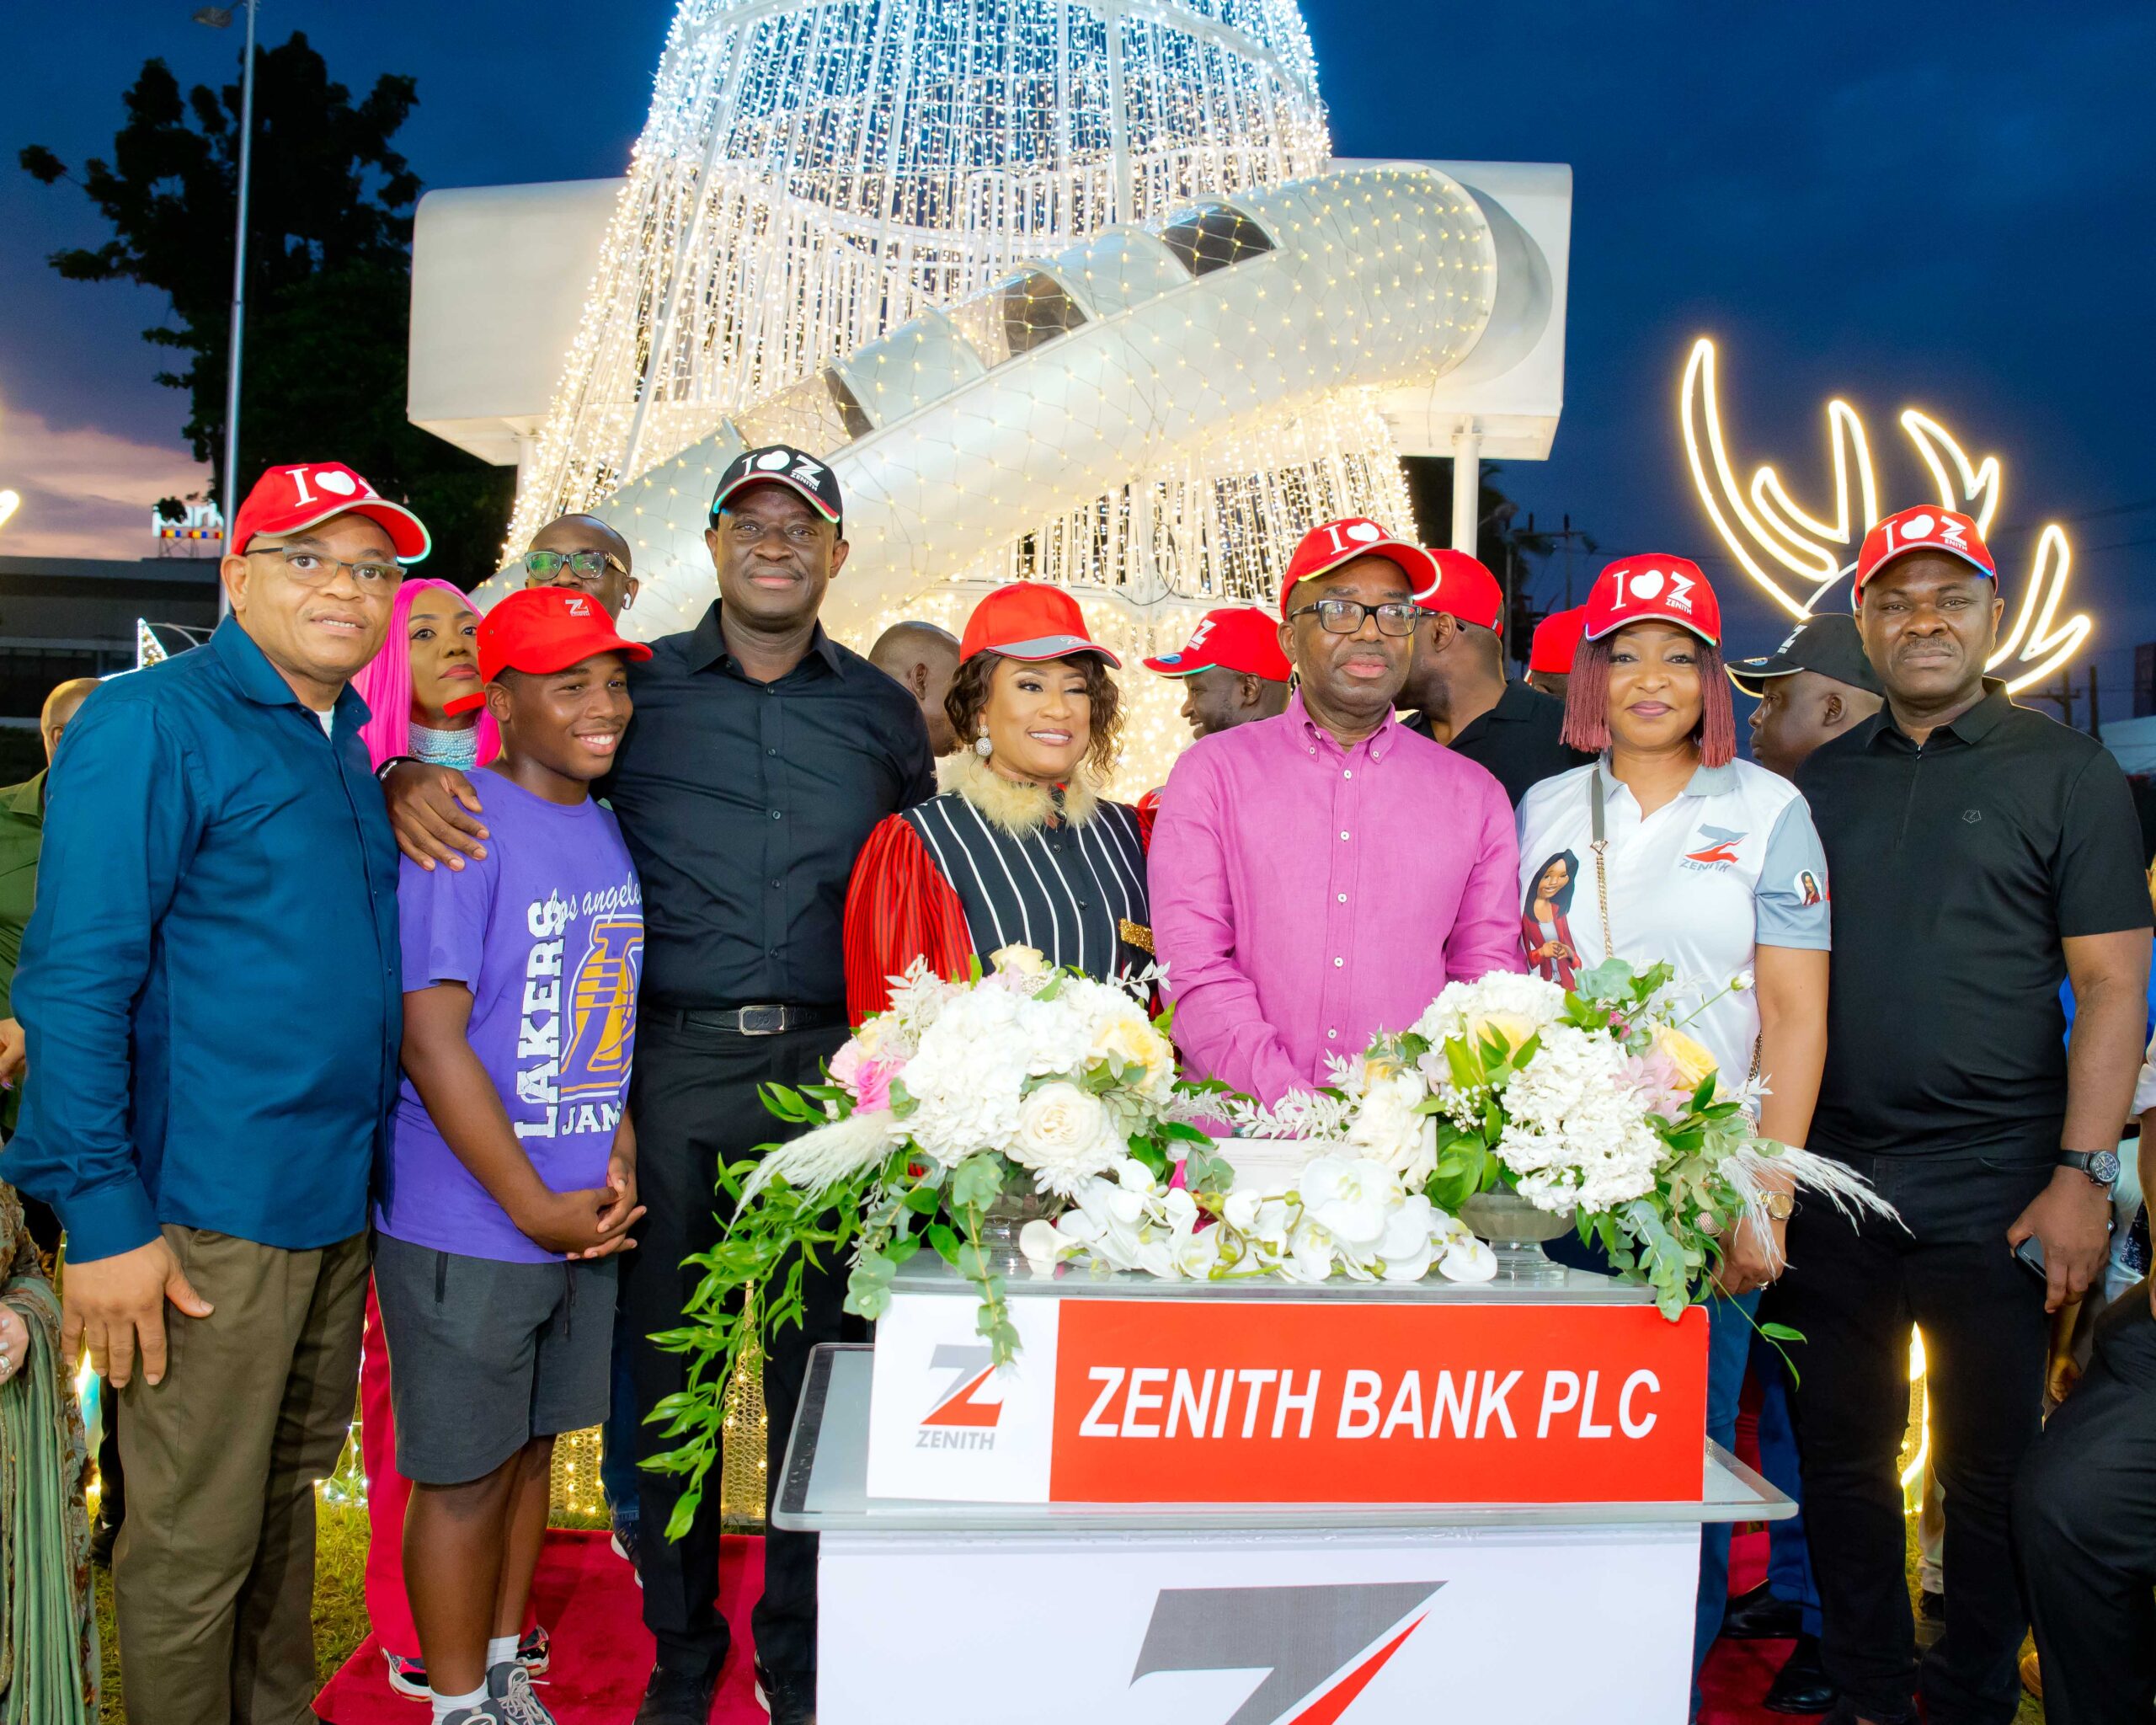 SPECTACLE AS ZENITH BANK LIGHTS UP AJOSE ADEOGUN STREET FOR THE YULETIDE SEASON